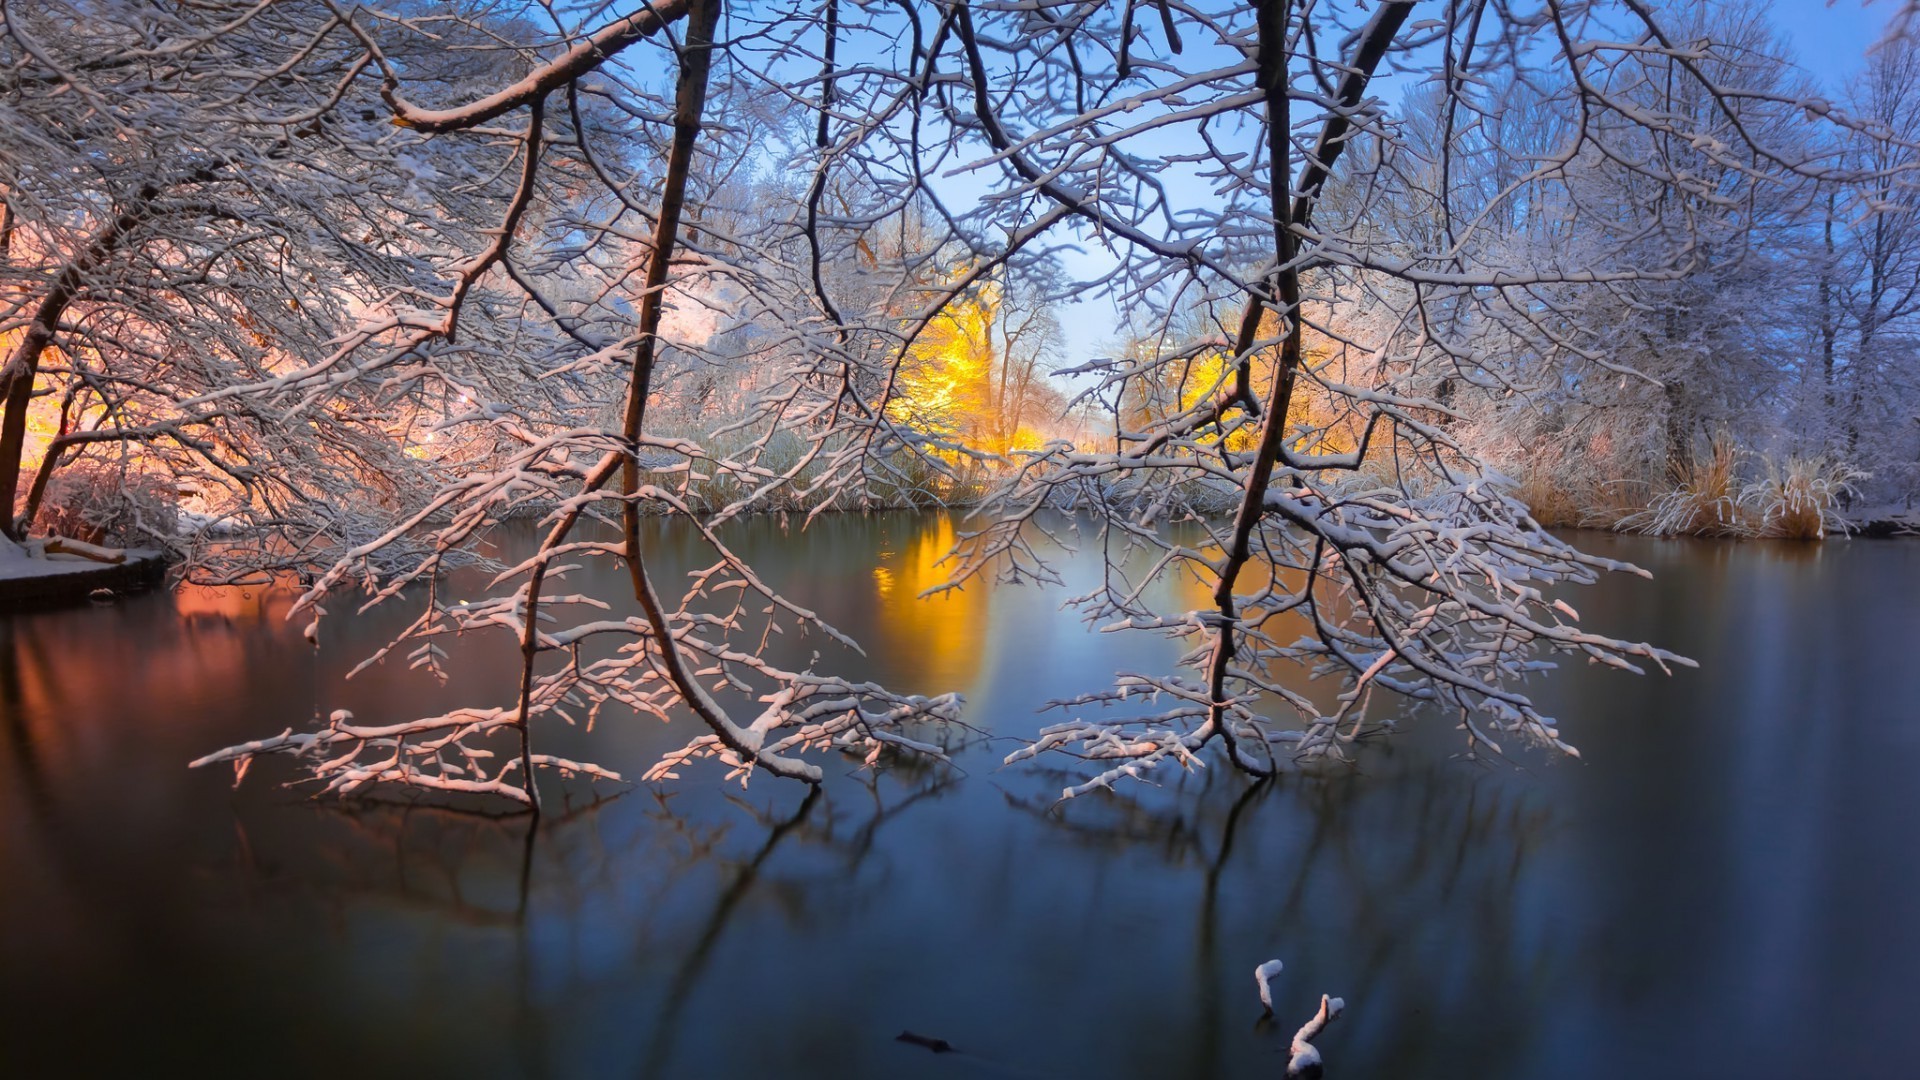 Nature, Landscape, Water, Lake, Trees, Brooklyn, Park, New York City, USA, Sunrise, Winter, Snow, Branch, Reflection, Morning, Long Exposure Wallpapers HD